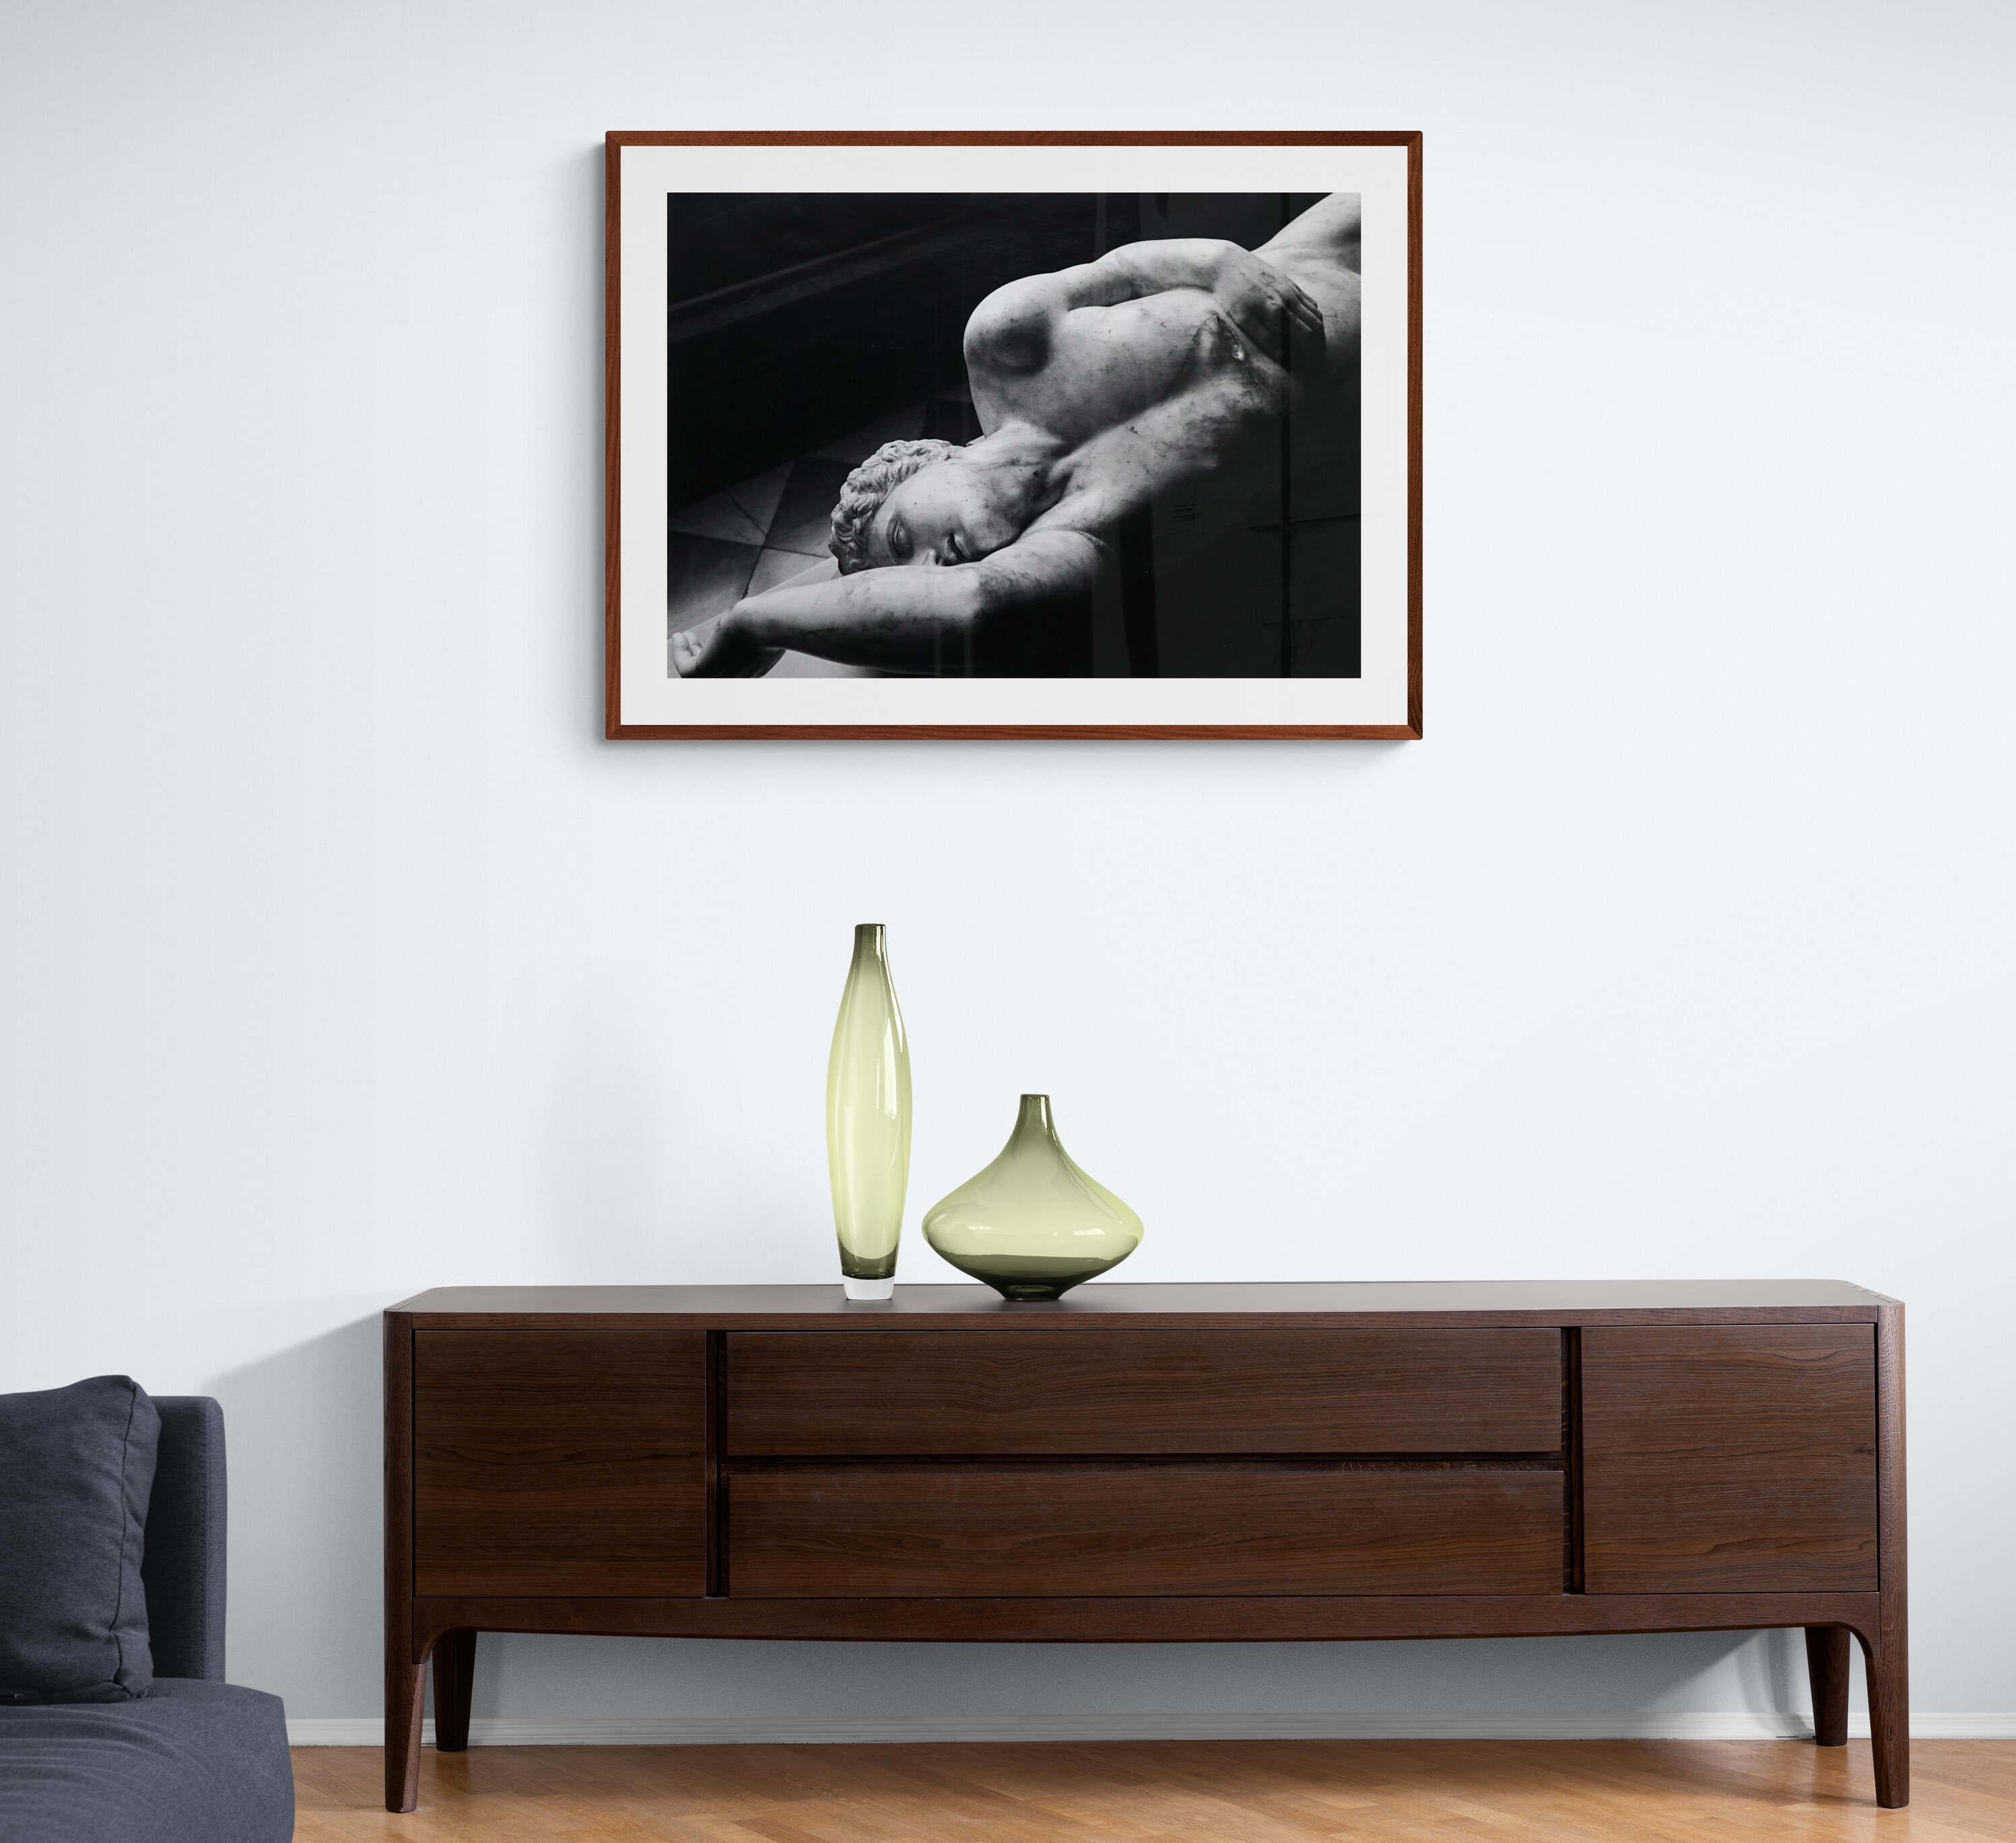 Statuary - Off-Print # 2 - 1976 - Minimalist Black & White Photography For Sale 1